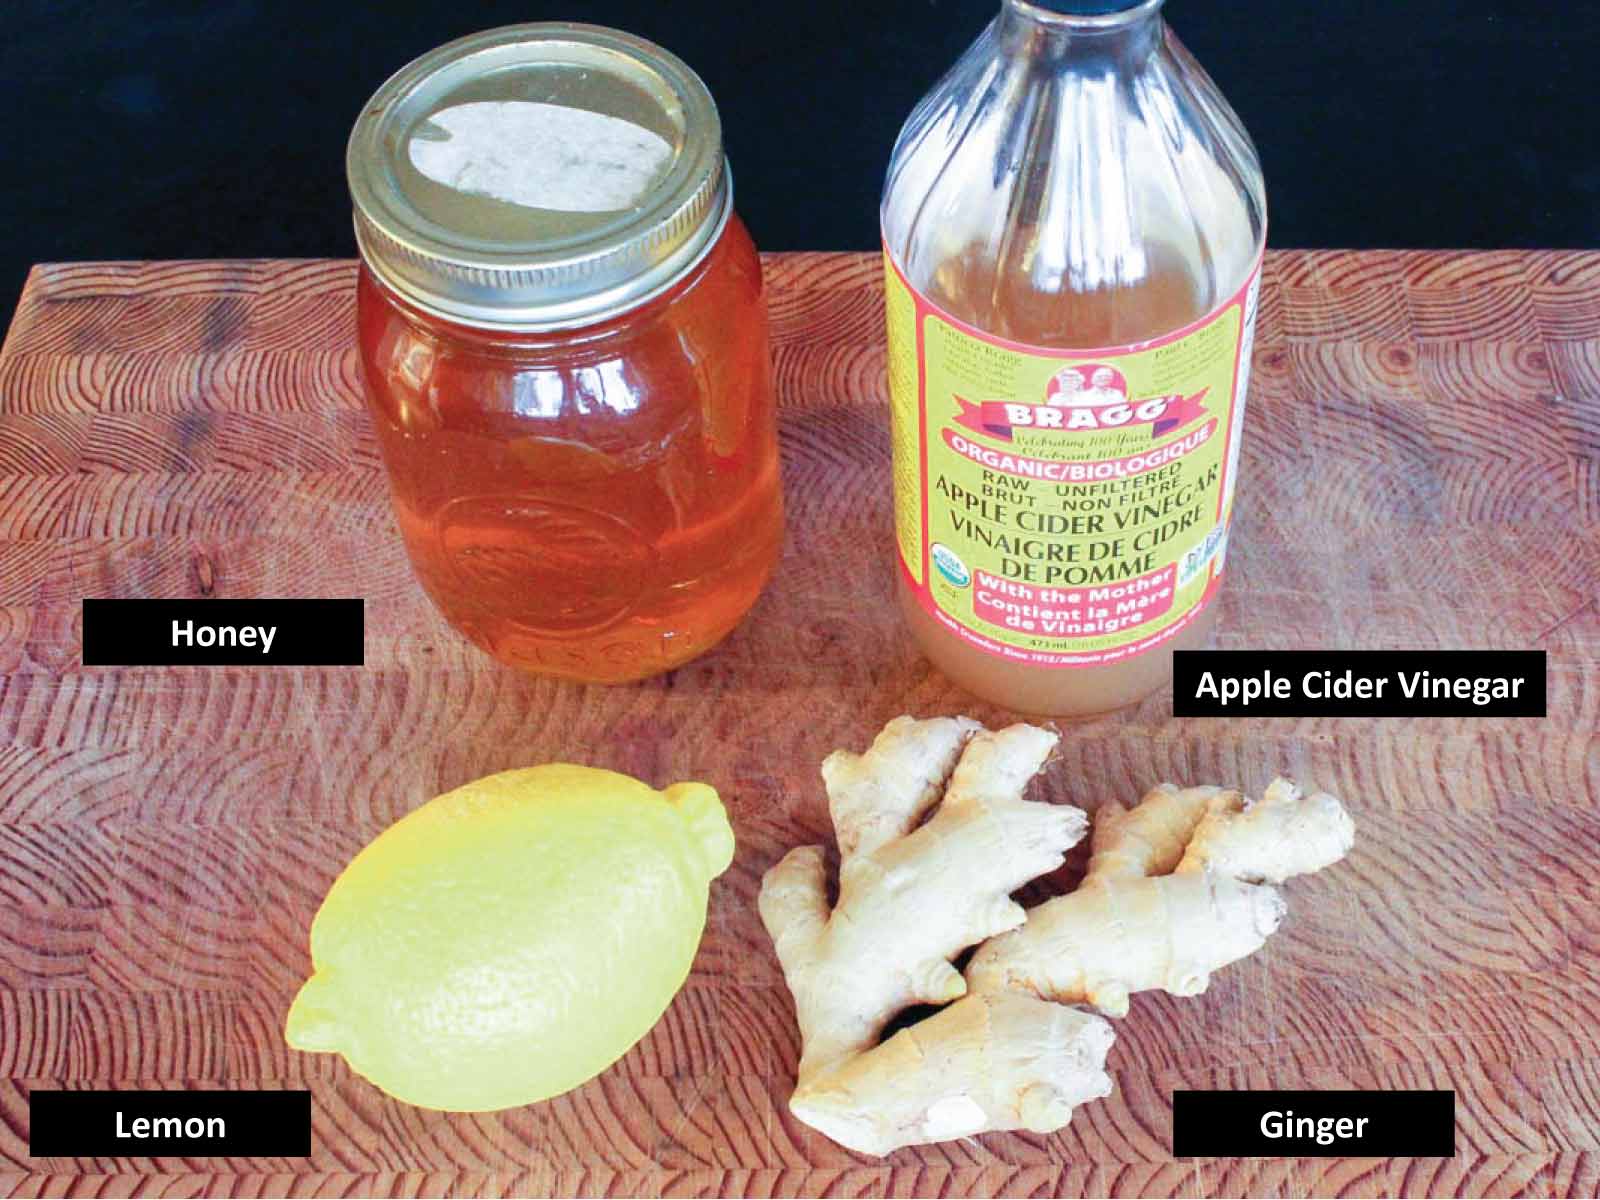 Cutting board with the following labelled ingredients: honey, apple cider vinegar, lemon, ginger root